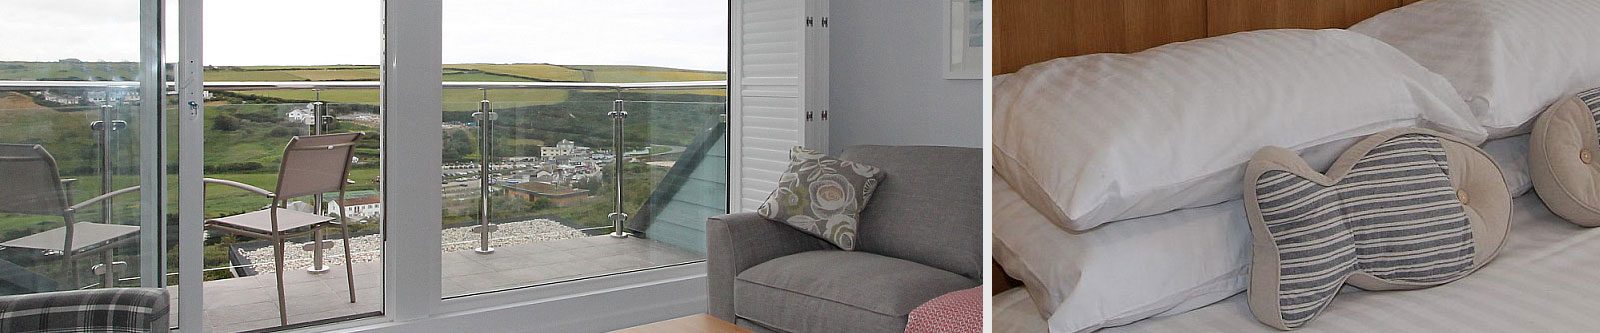 Mawgan Porth Apartments - lounge with view from balcony and bedroom